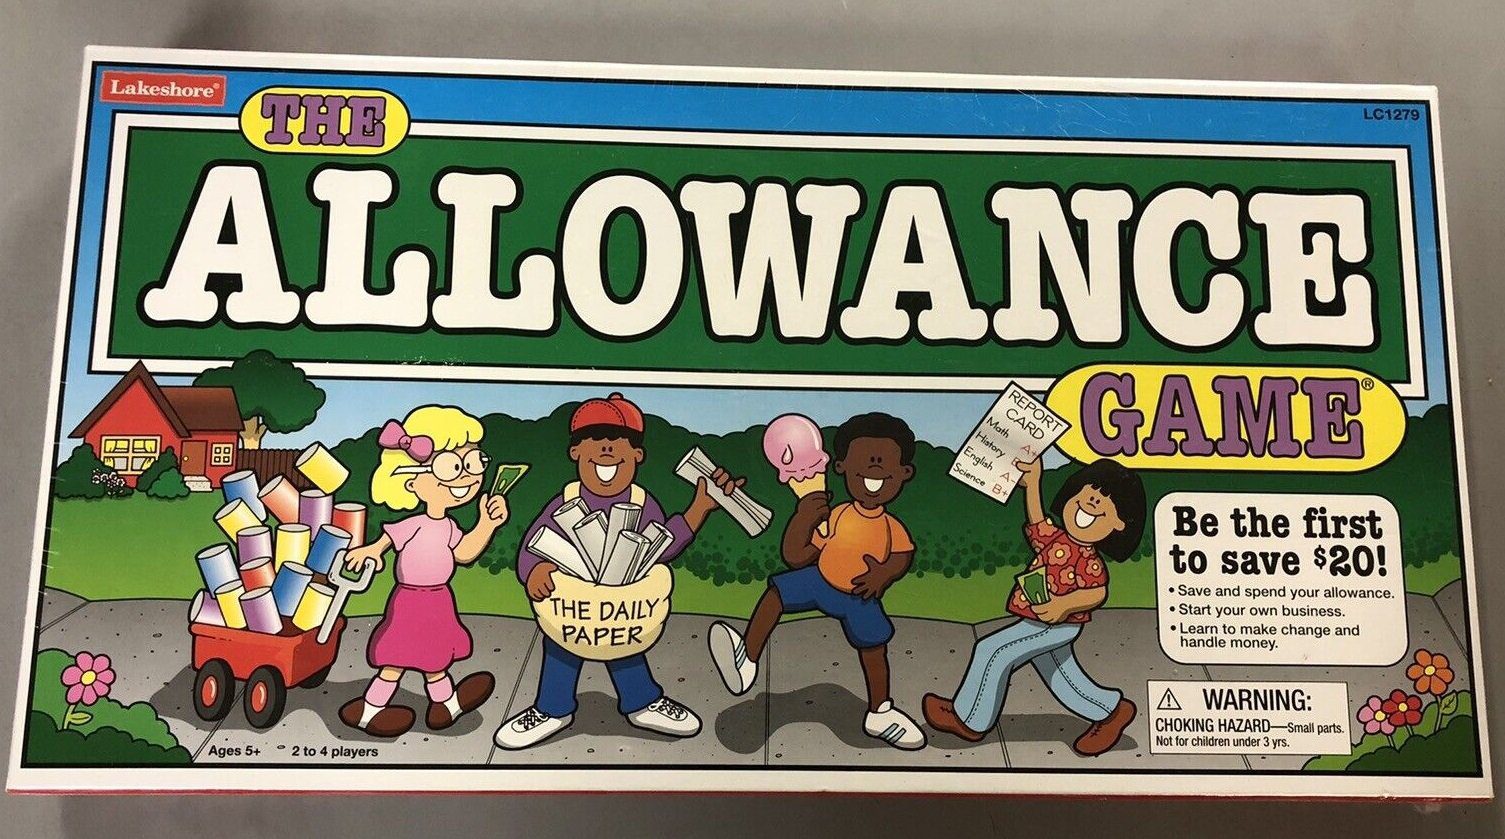 The Allowance Game® at Lakeshore Learning